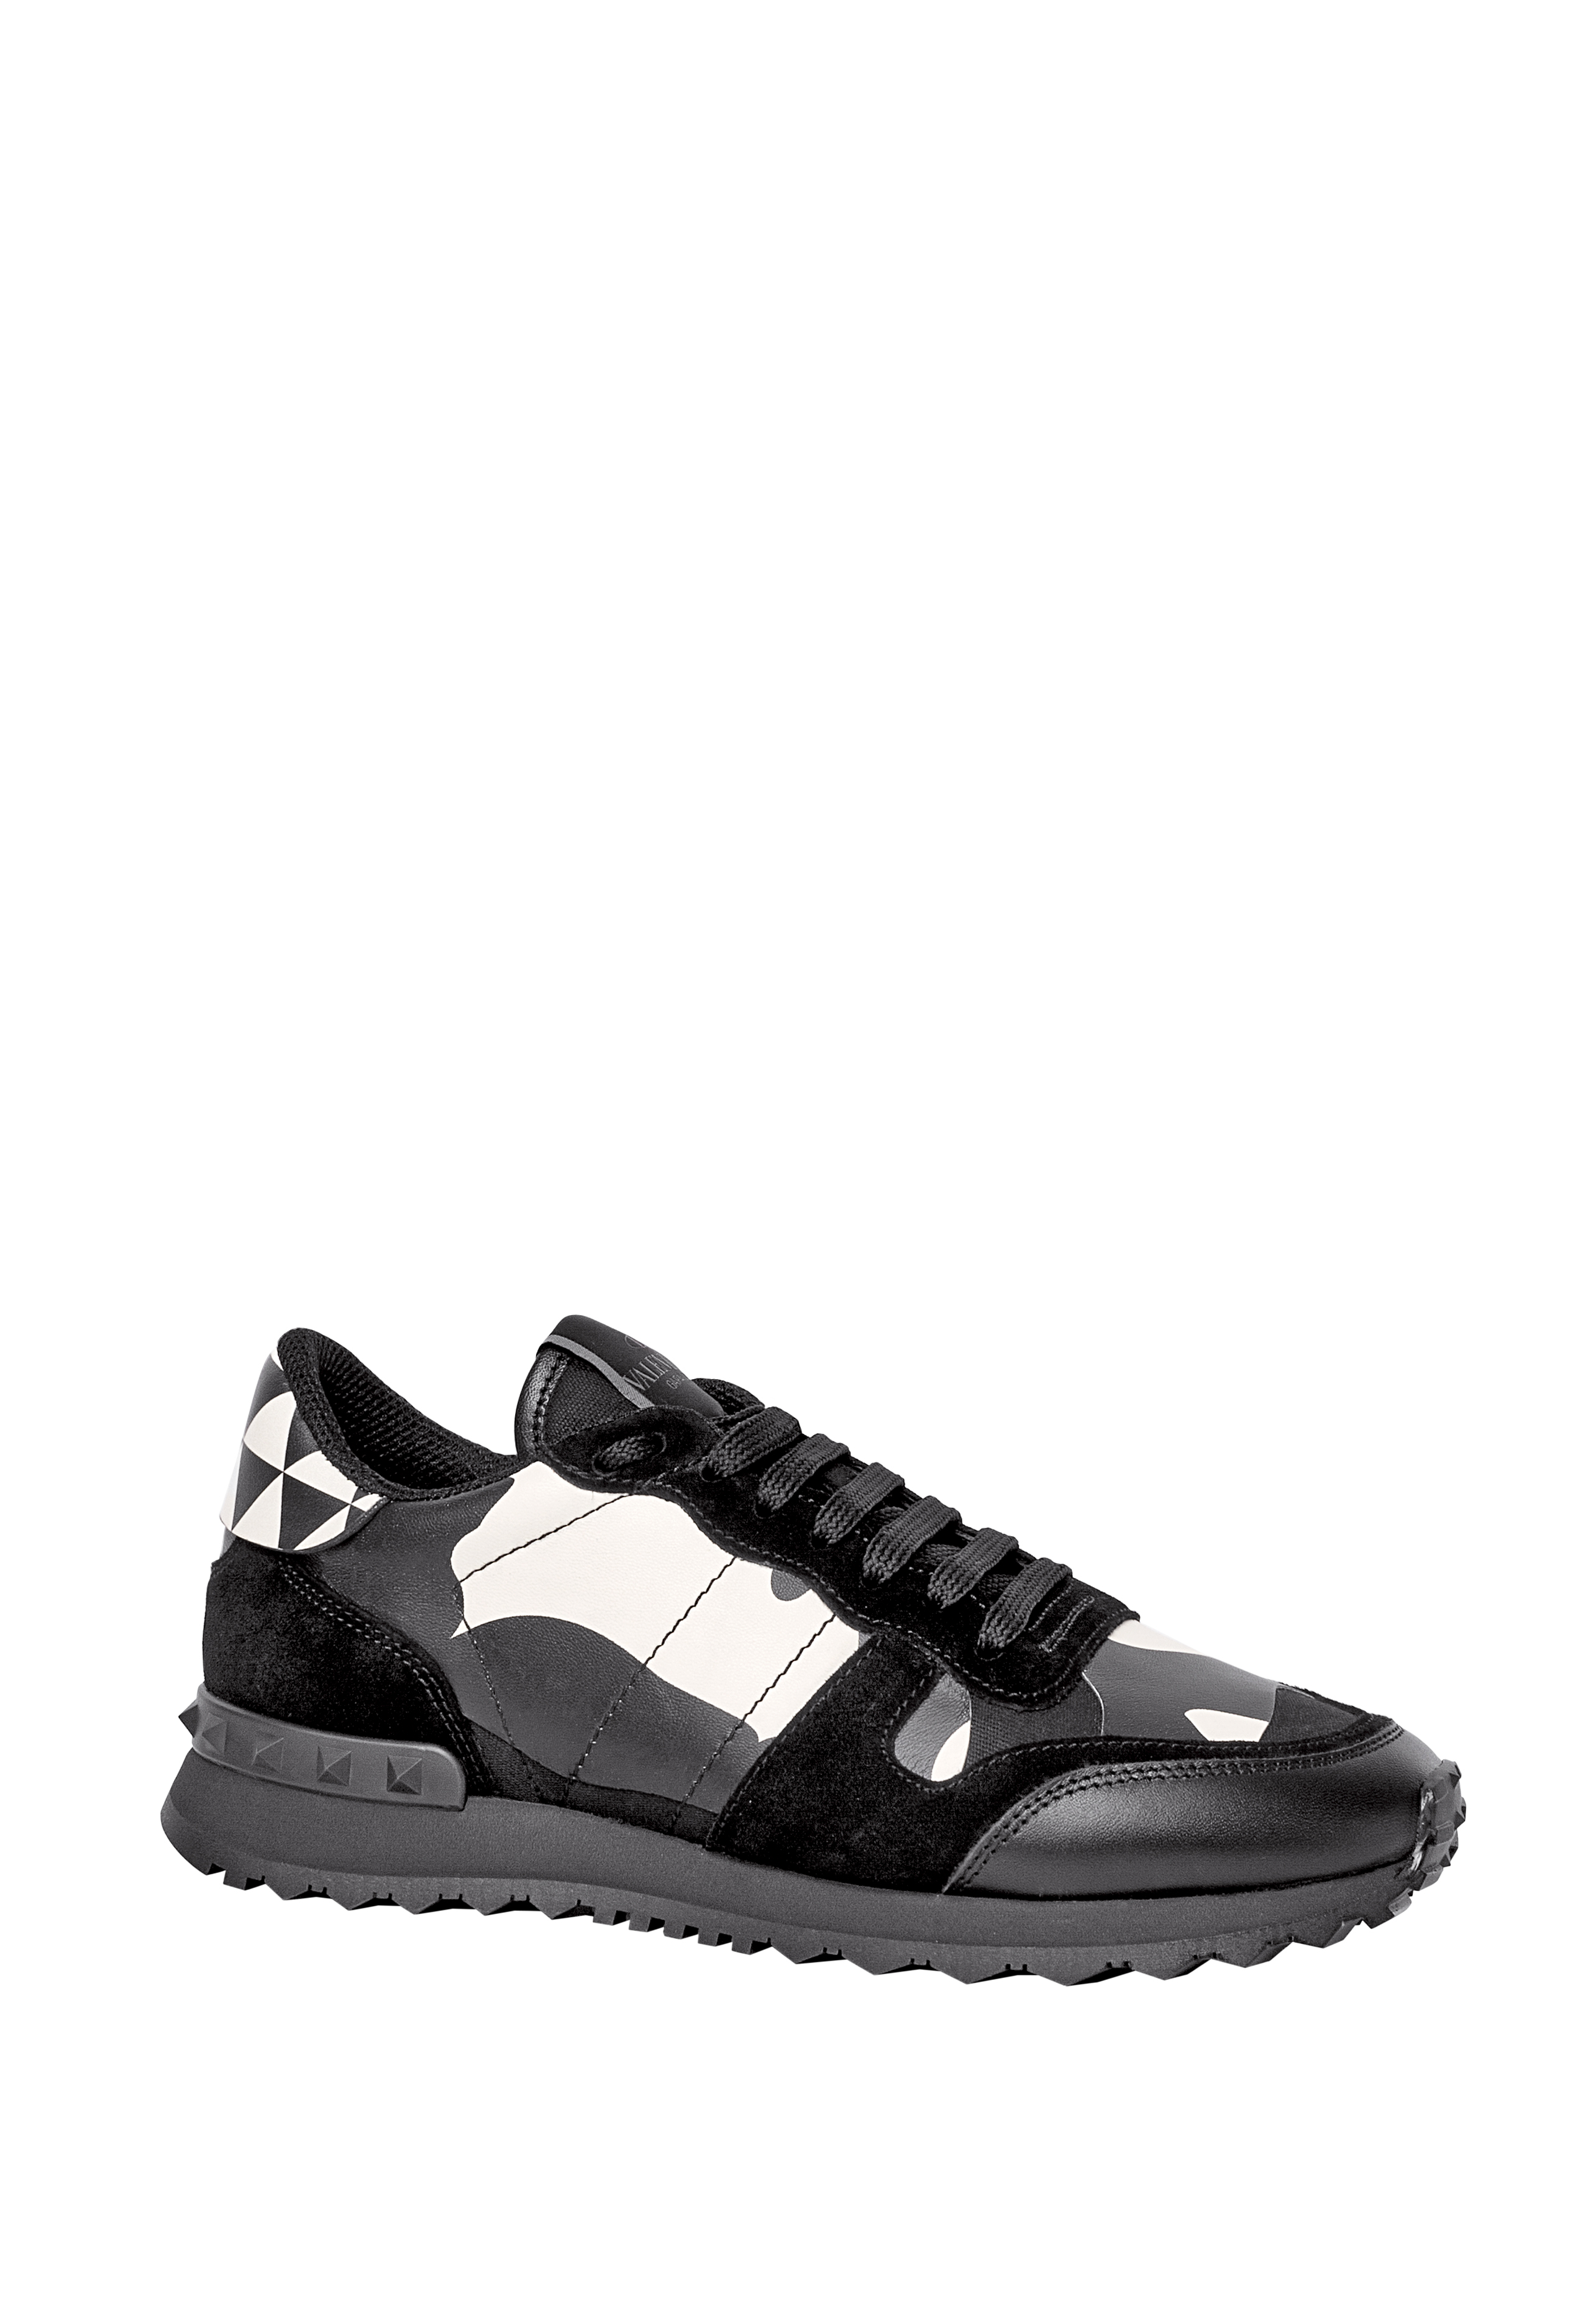 Valentino's Chic Sneaks - Daily Front Row